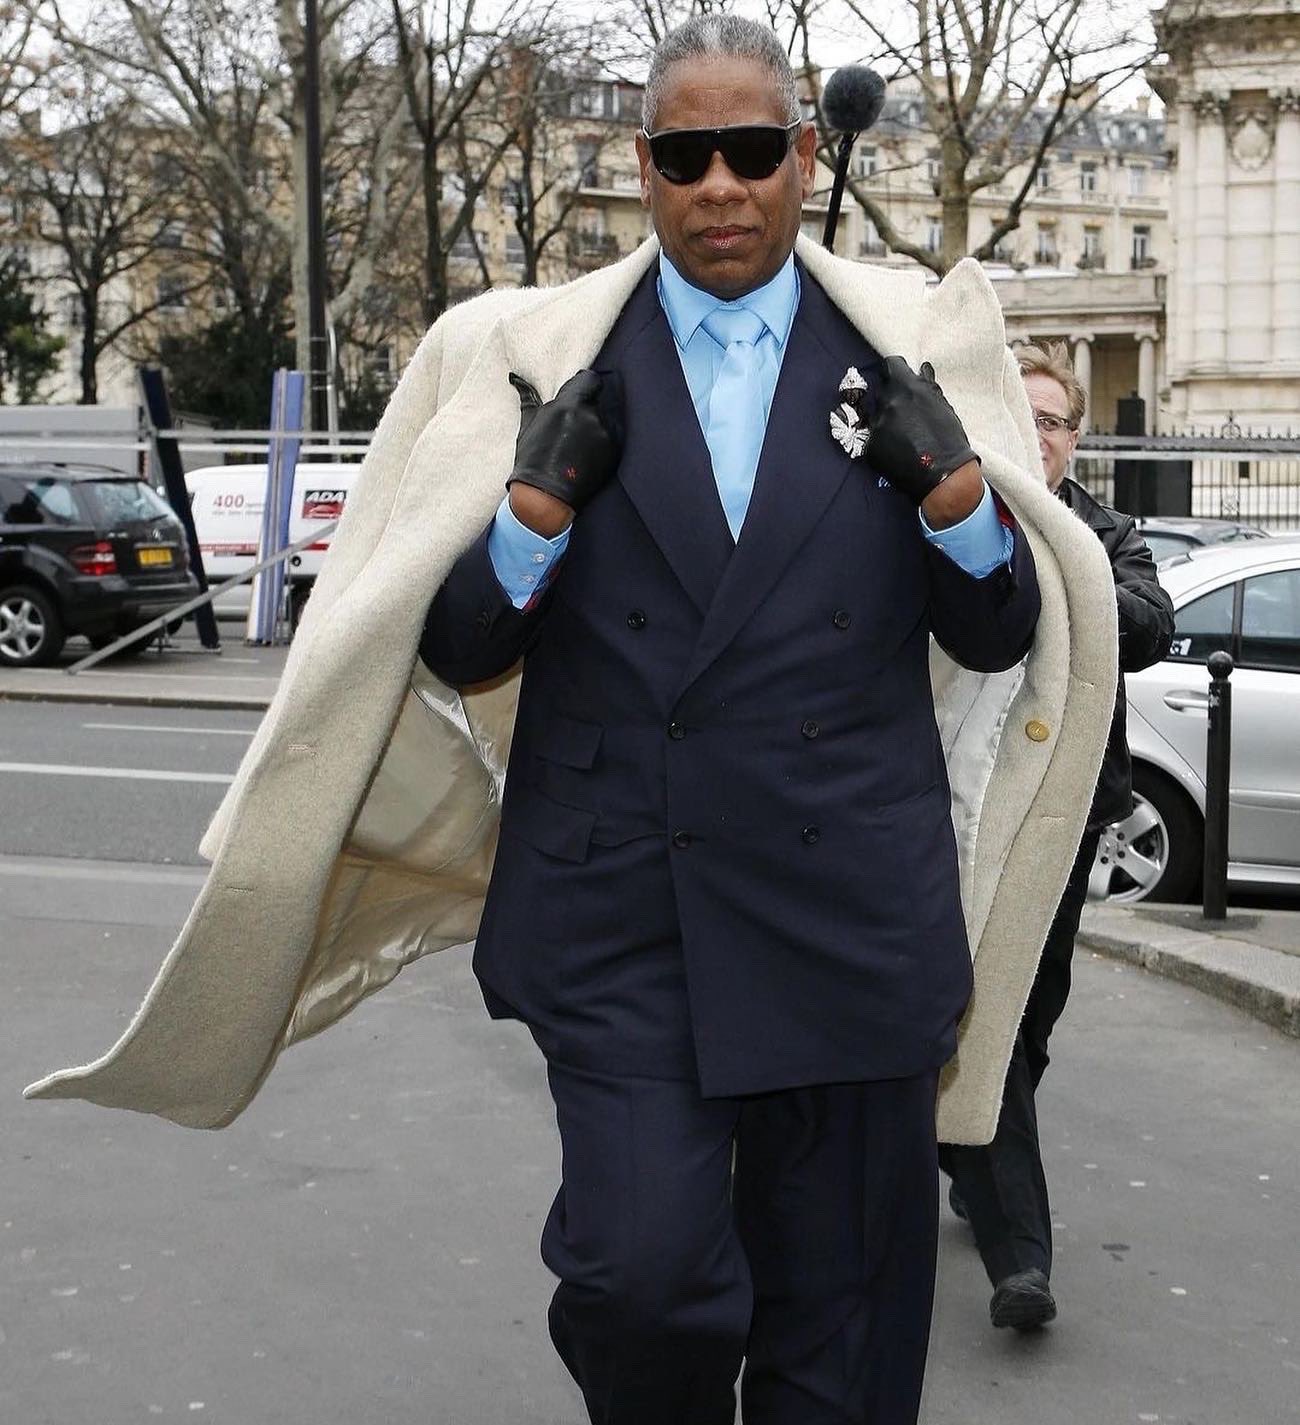 andre-leon-talley-fashion-icon-and-former-creative-director-of-vogue-dies-at-73